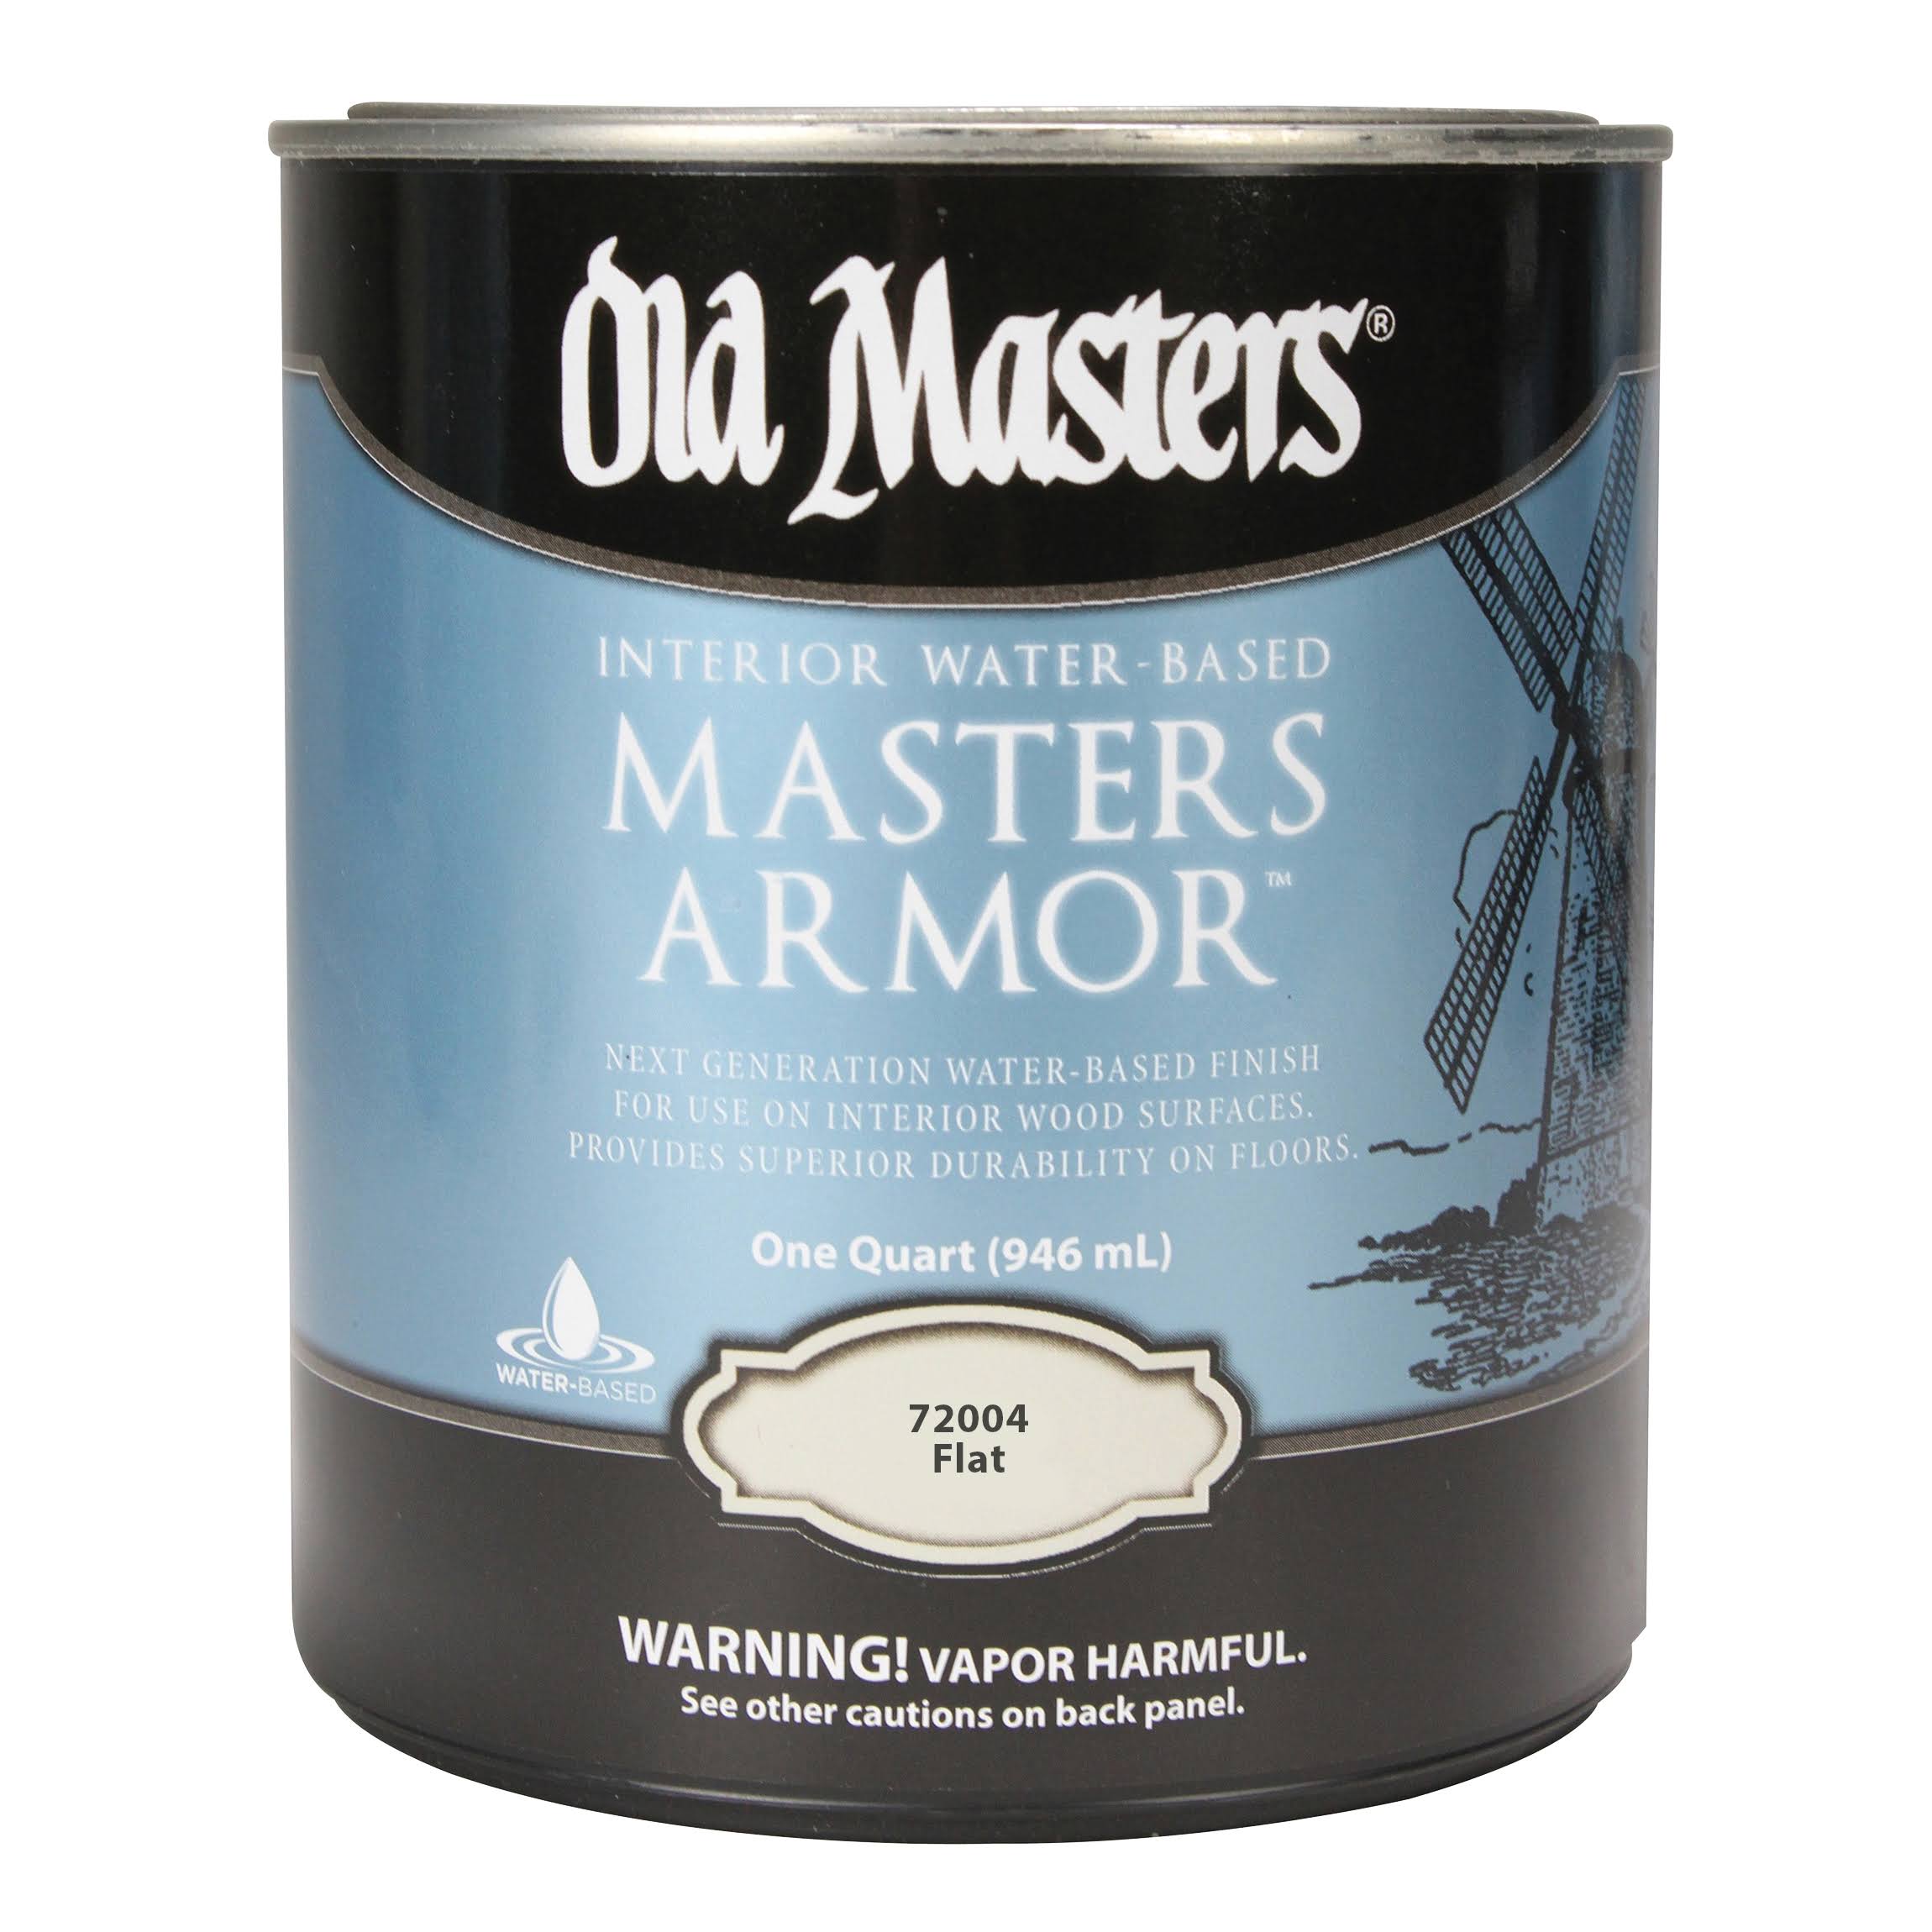 Old Masters 292675 1 qt Flat Masters Armor